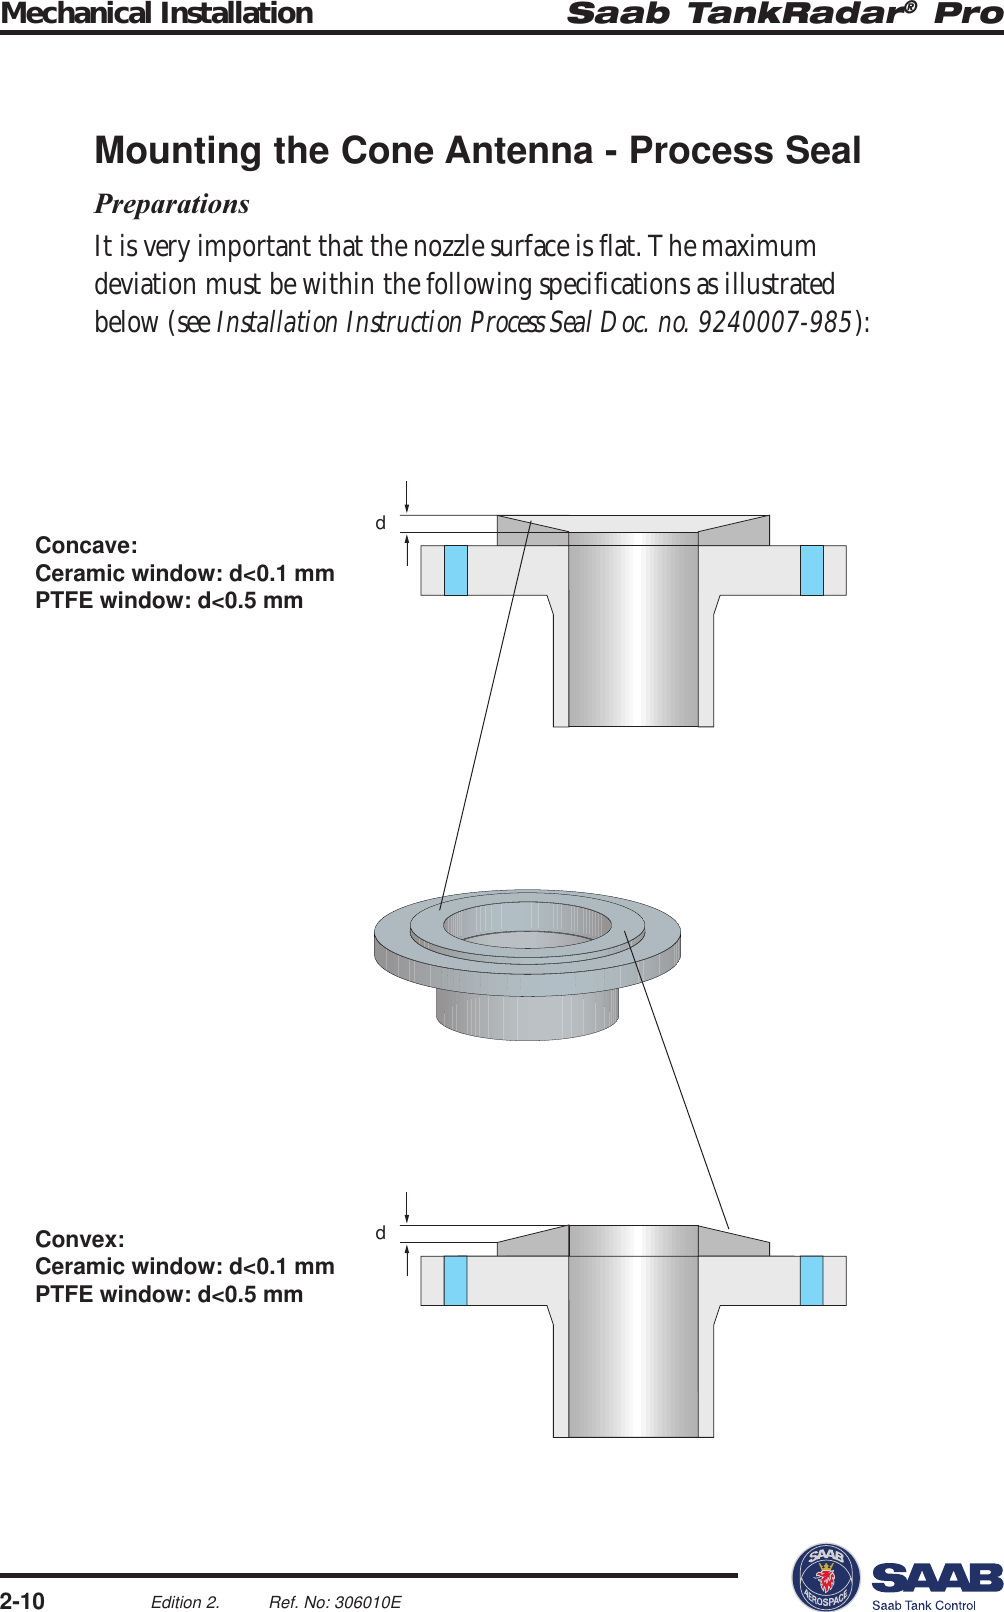 Saab TankRadar® ProMechanical Installation2-10Edition 2. Ref. No: 306010EddConvex:Ceramic window: d&lt;0.1 mmPTFE window: d&lt;0.5 mmConcave:Ceramic window: d&lt;0.1 mmPTFE window: d&lt;0.5 mmMounting the Cone Antenna - Process SealPreparationsIt is very important that the nozzle surface is flat. The maximumdeviation must be within the following specifications as illustratedbelow (see Installation Instruction Process Seal Doc. no. 9240007-985):